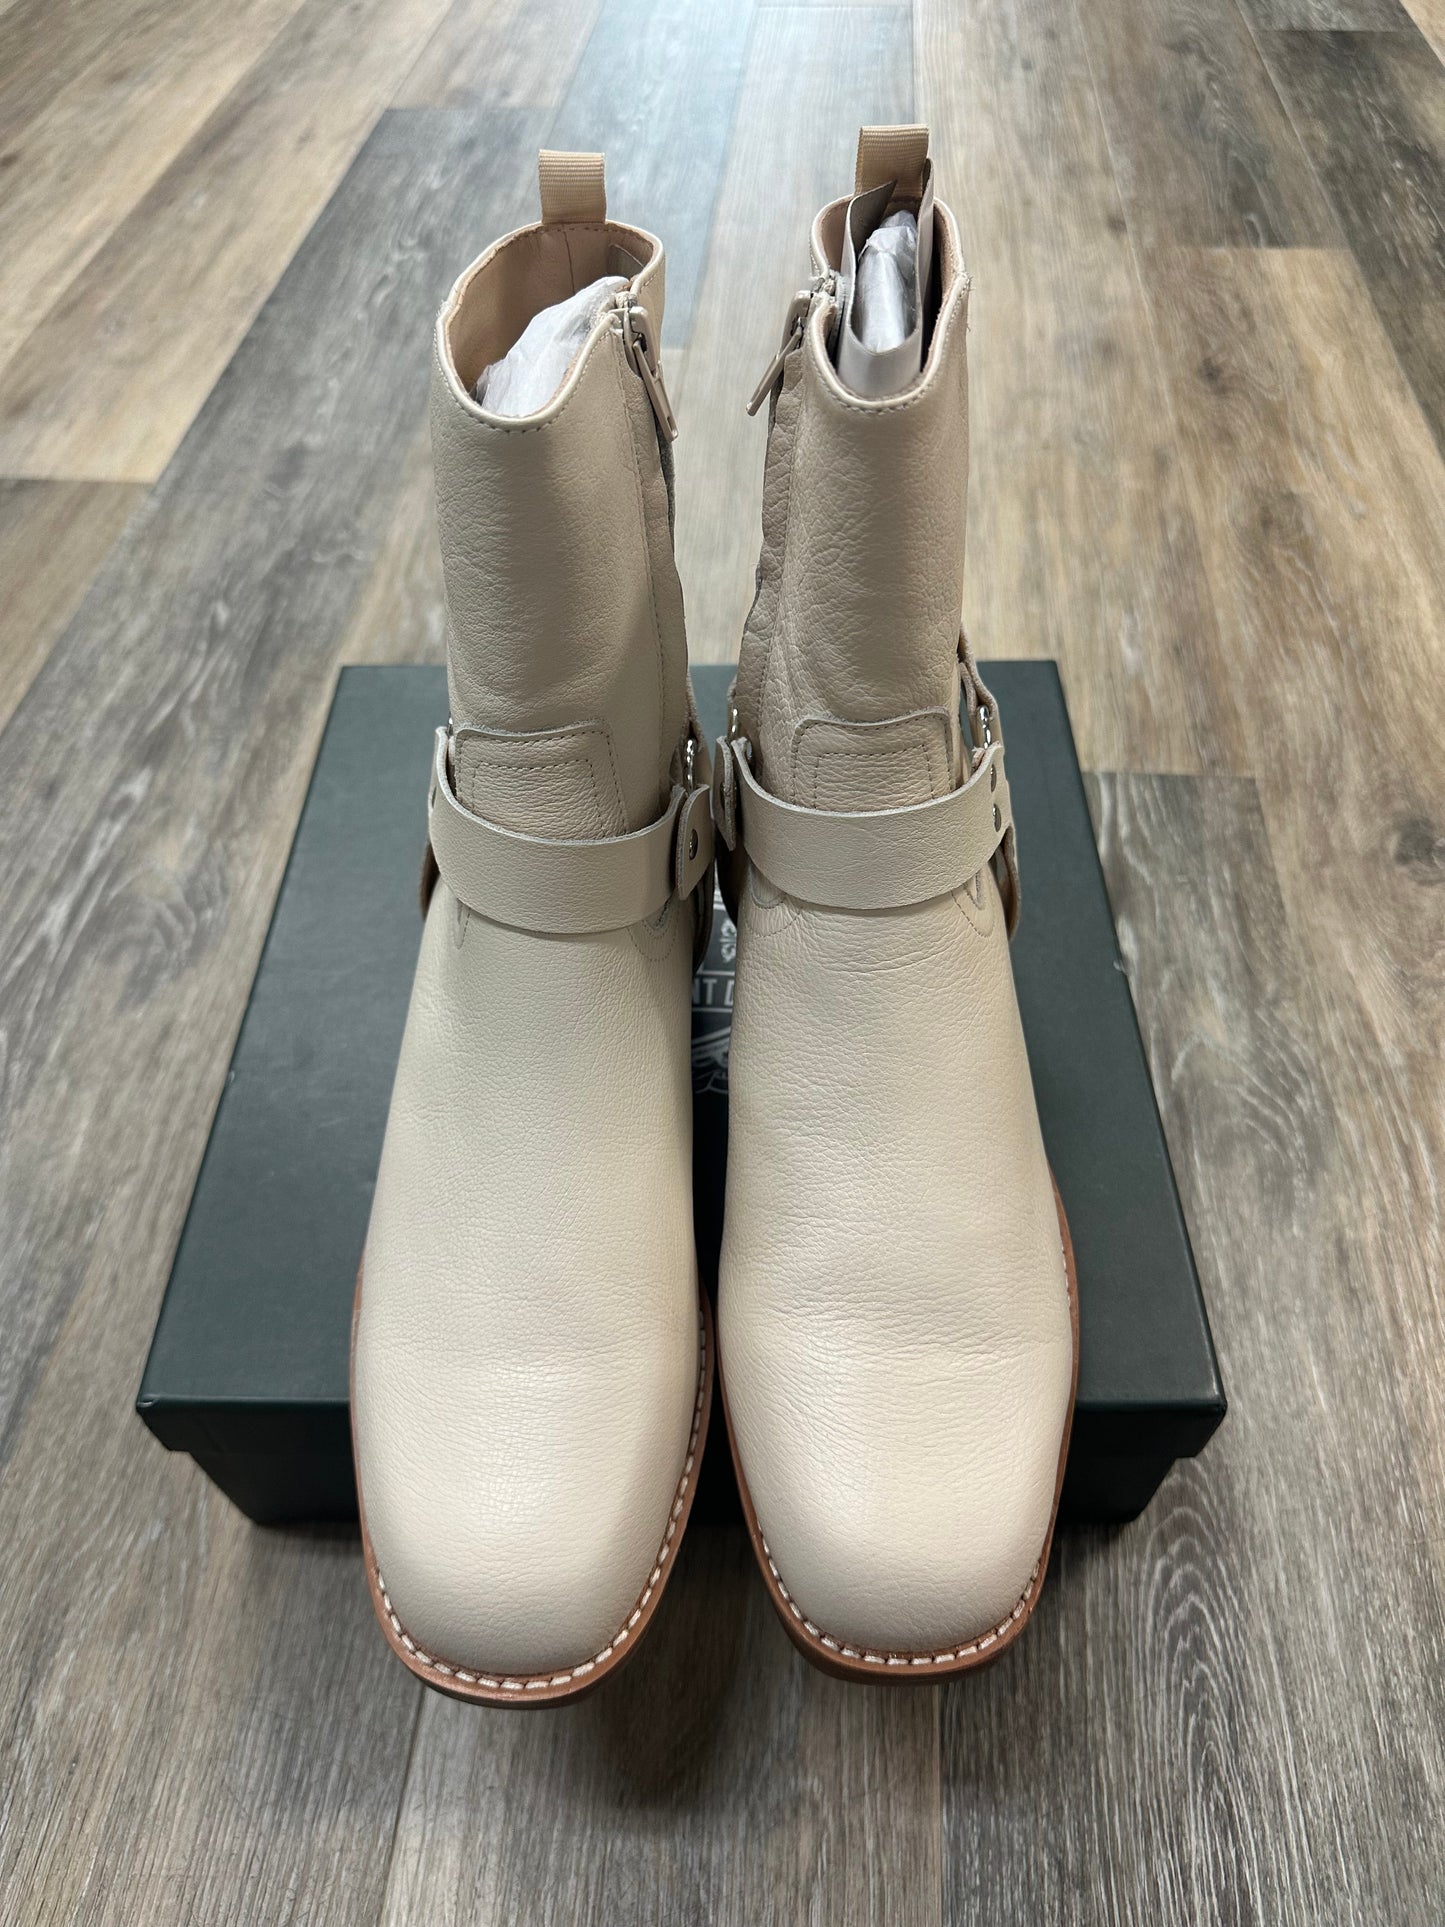 Cream Boots Ankle Heels Silent D, Size 9